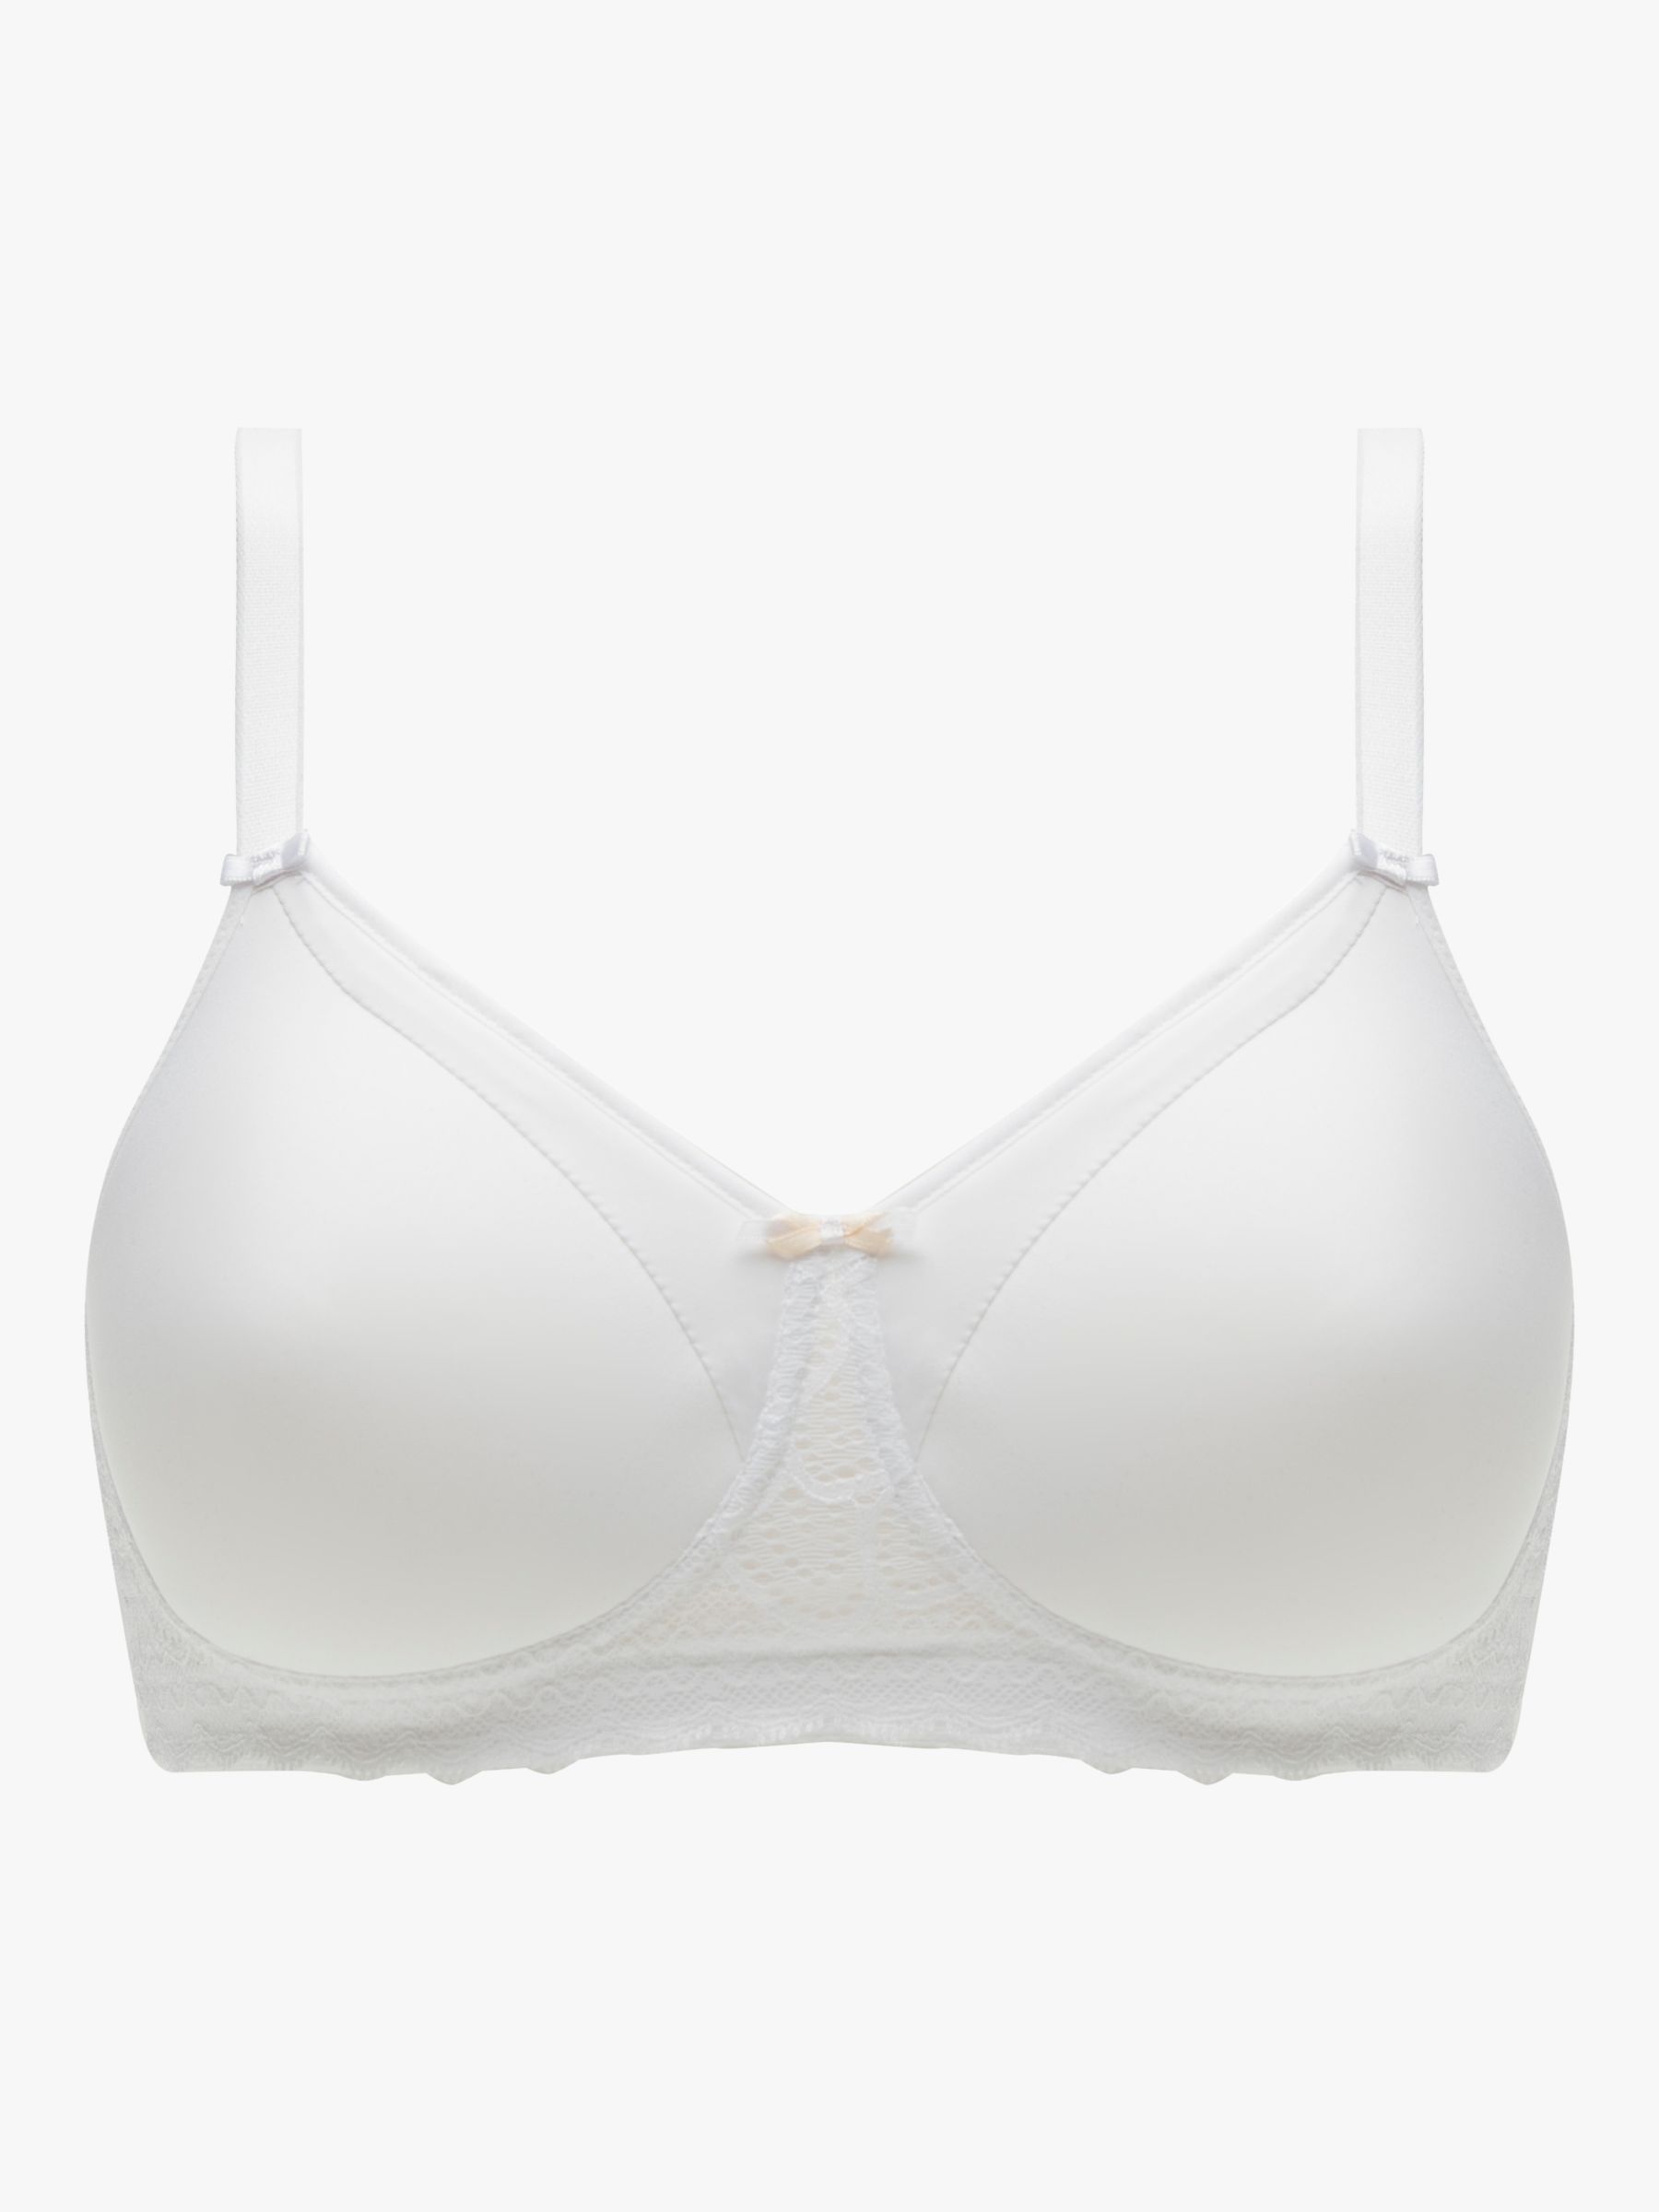 Chantelle Absolute Comfort Memory Foam Non Wired Bra, White at